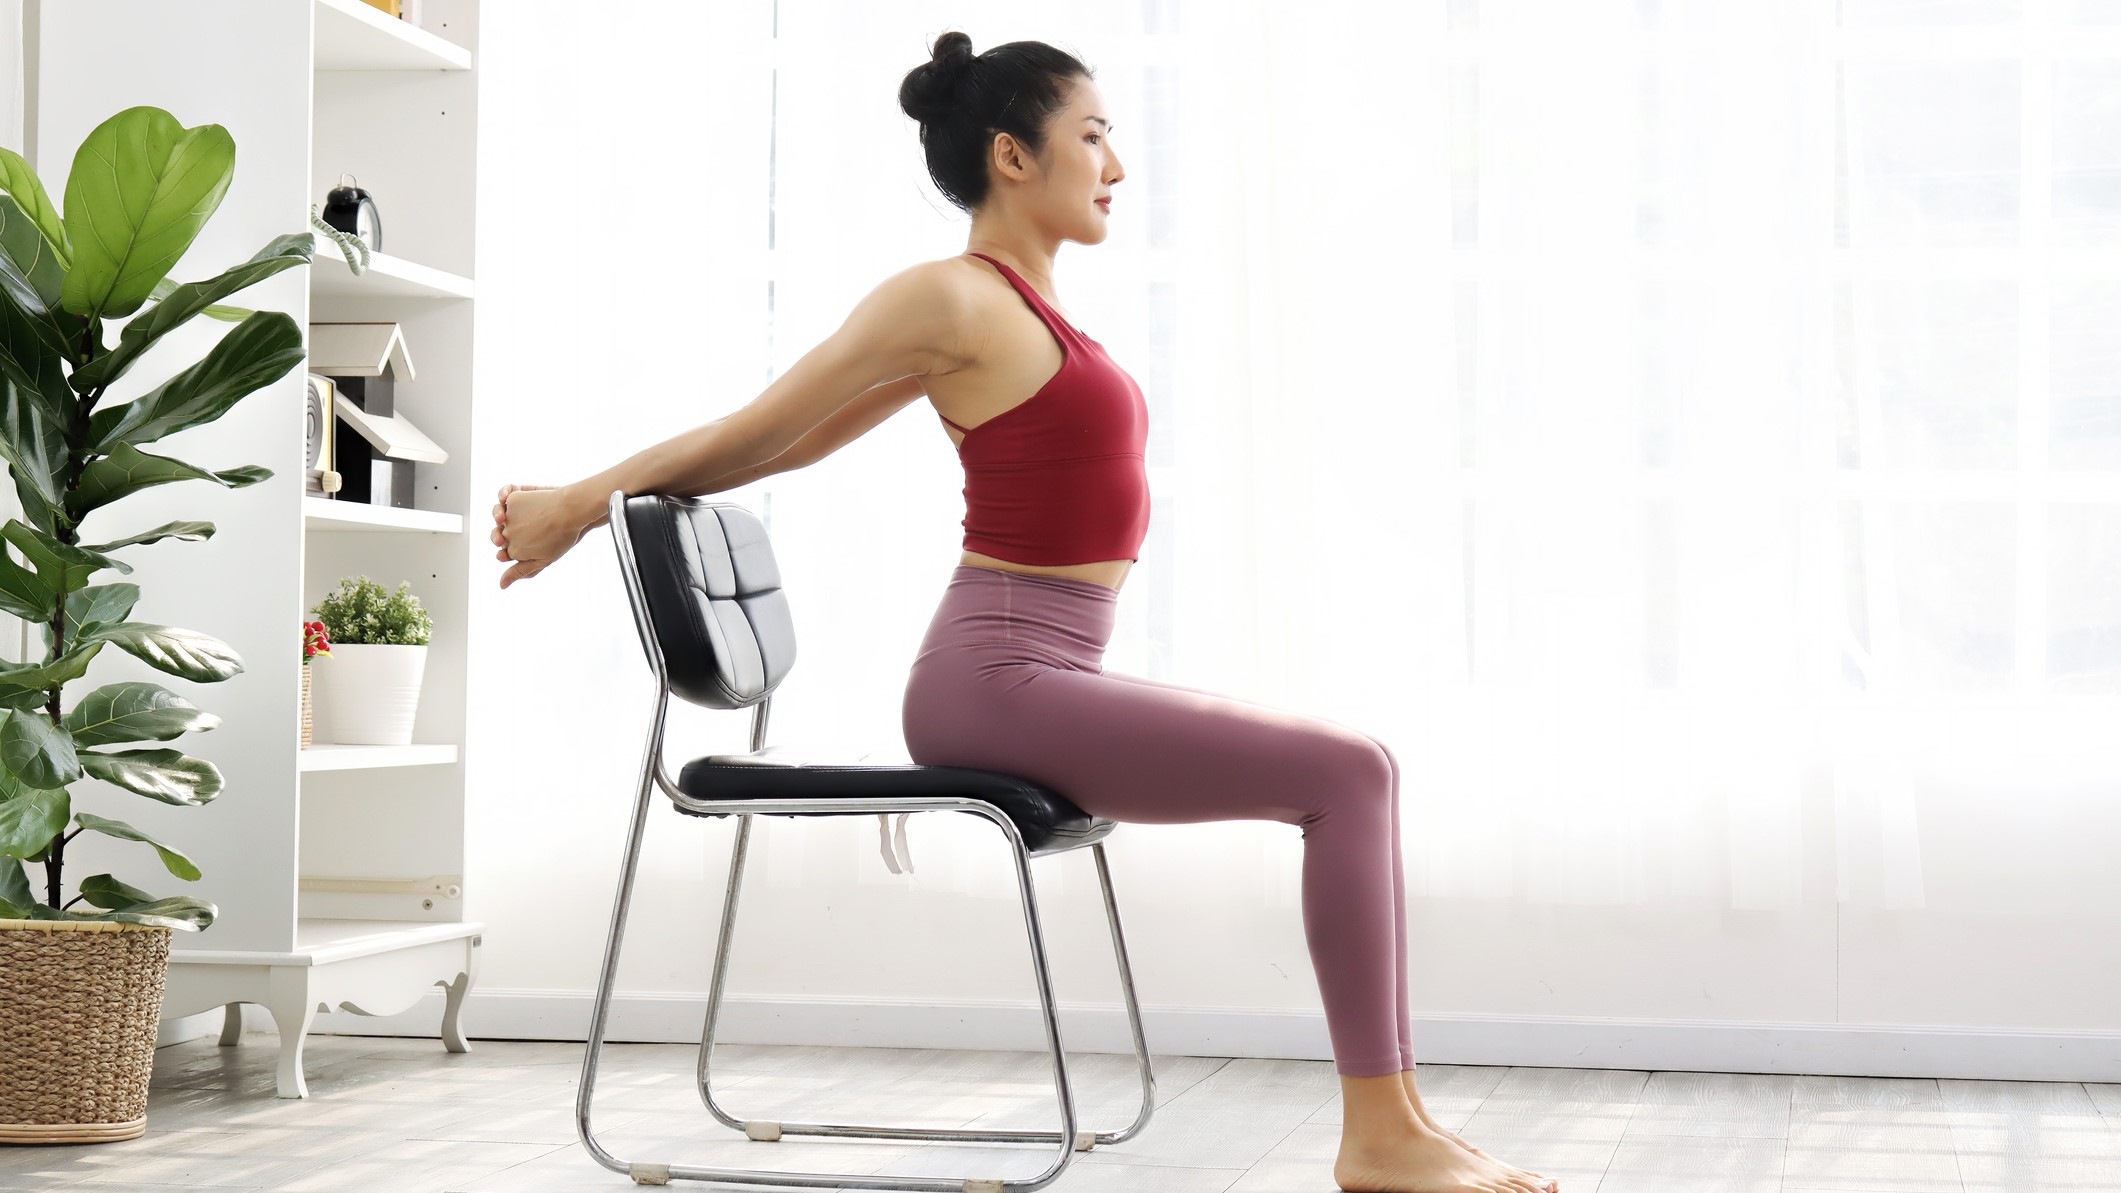 Seated Chair Exercises & Workouts 